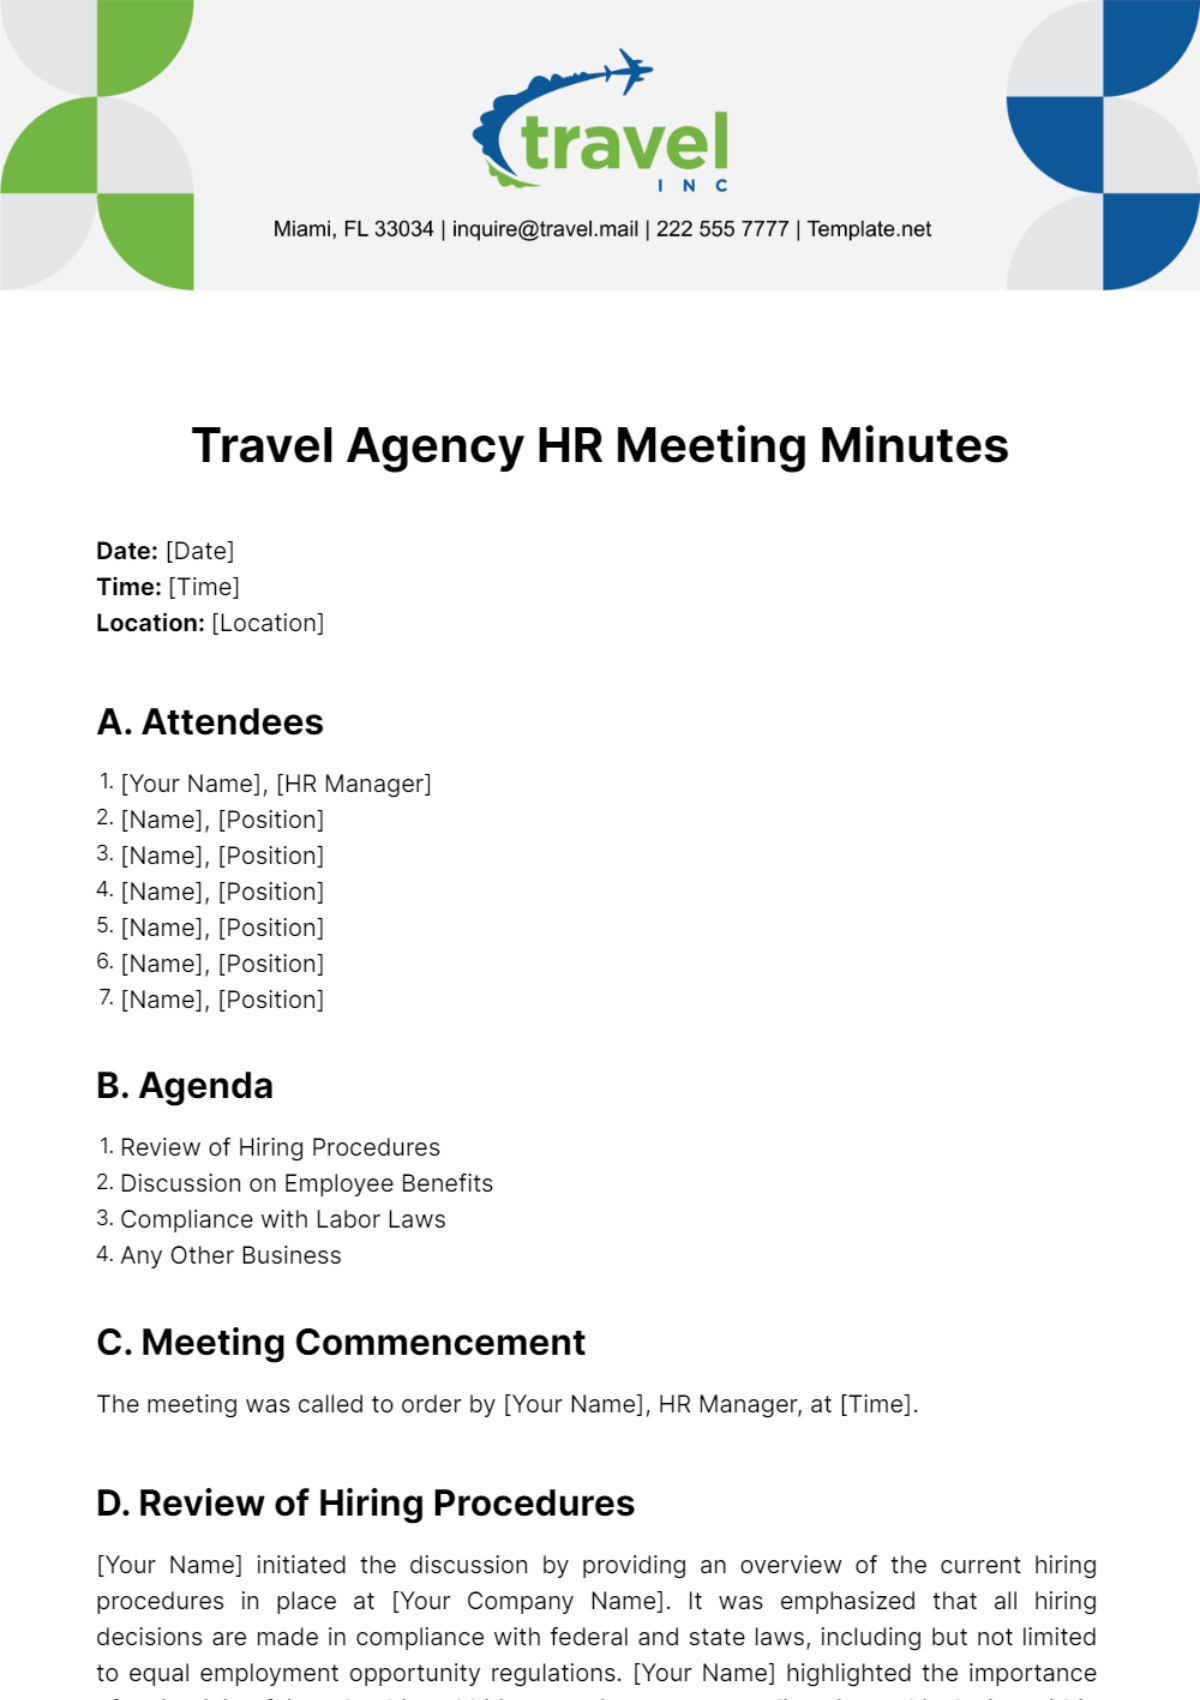 Free Travel Agency HR Meeting Minutes Template